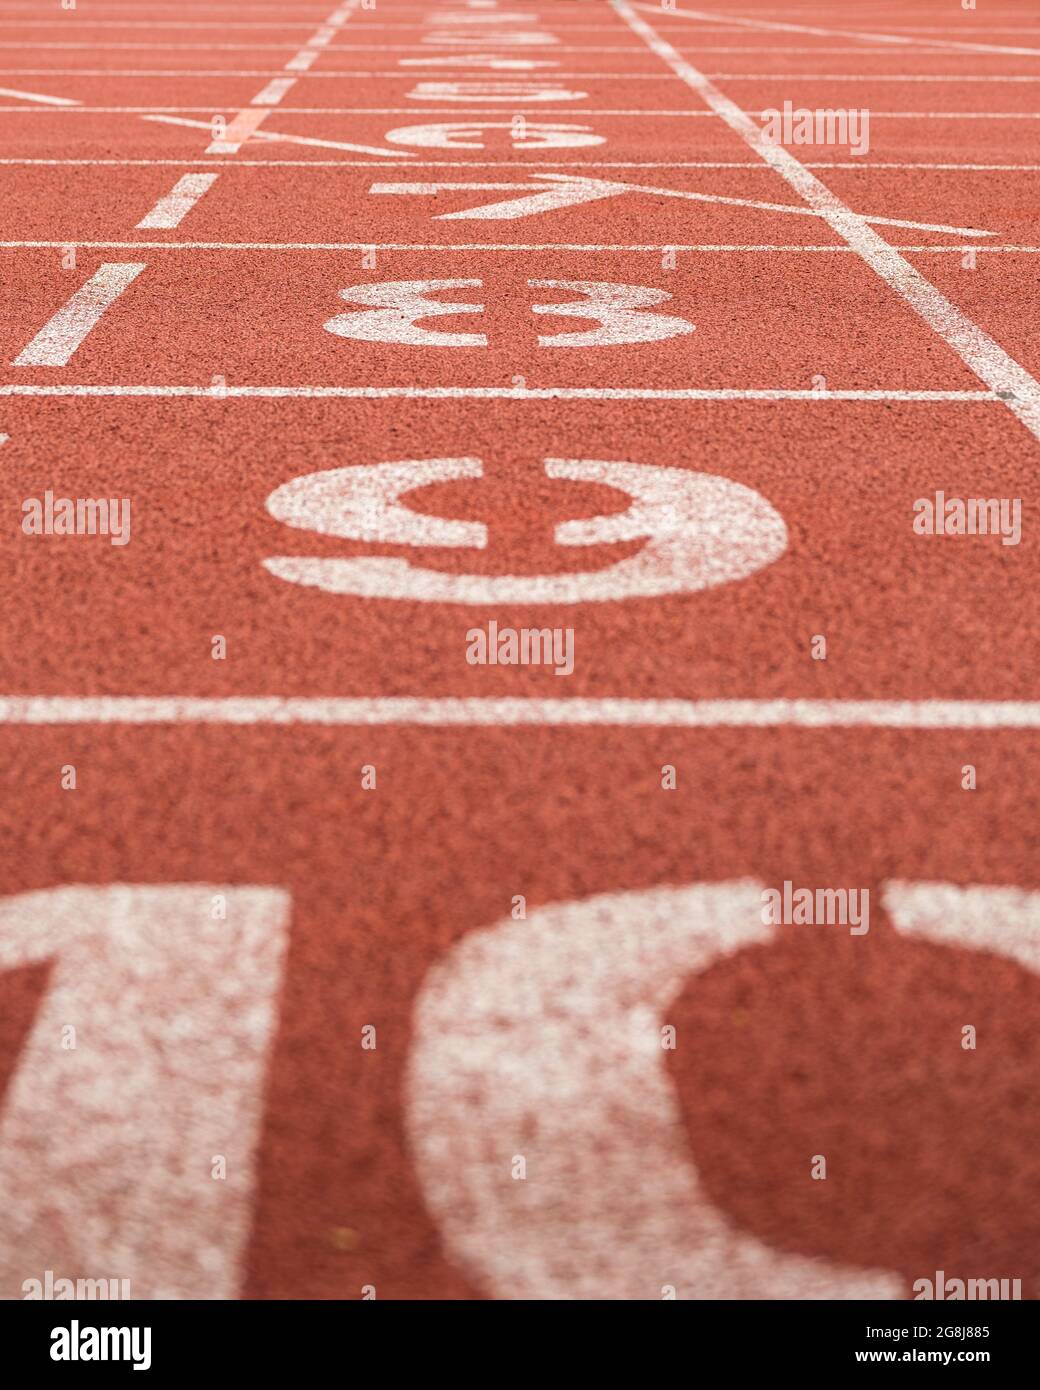 Sideview on lane numbers at the finish of red race track (running track or athletics track), shallow depth of field Stock Photo